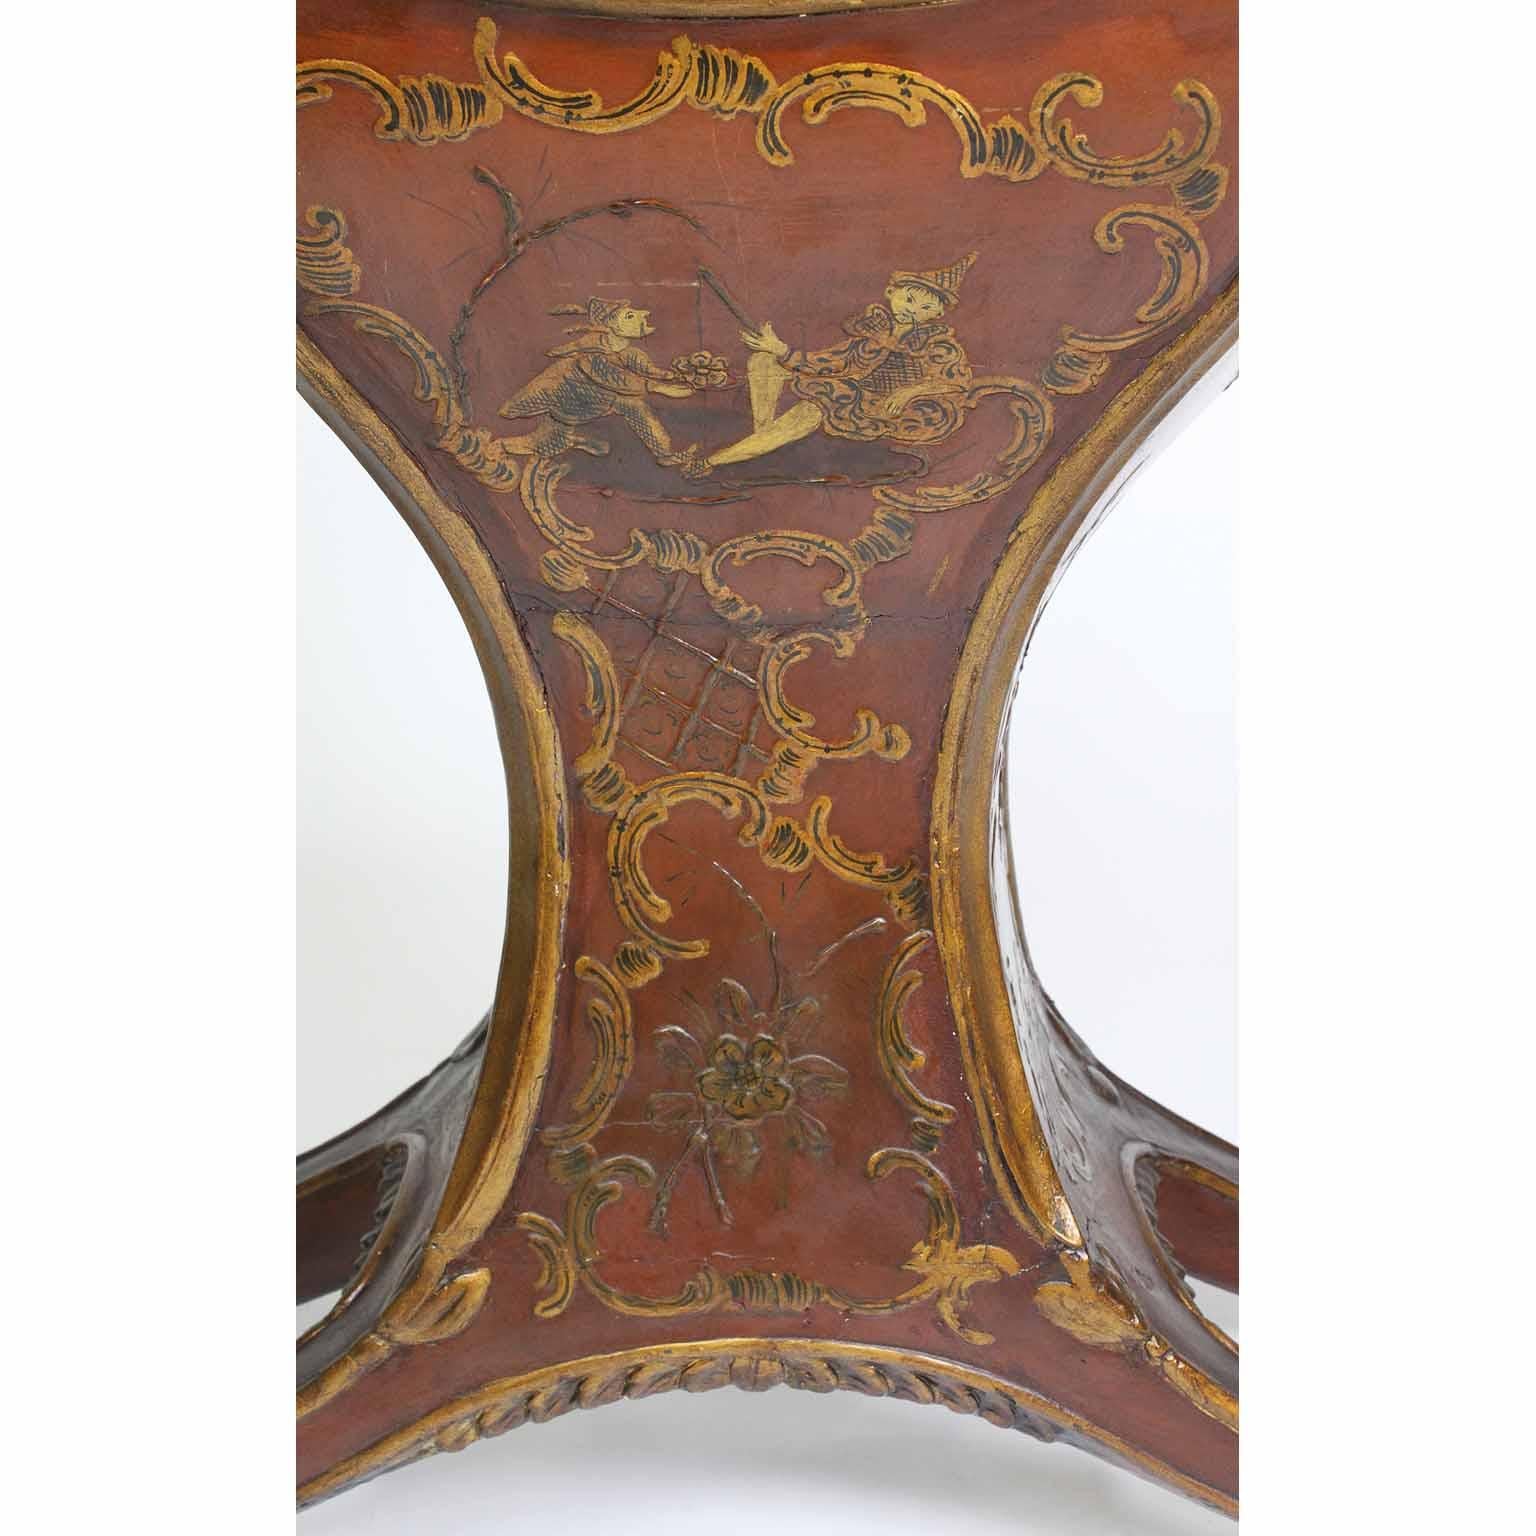 Rare Venetian 18th-19th Century Chinoiserie Red-Lacquer and Gilt Gondola Chair 5